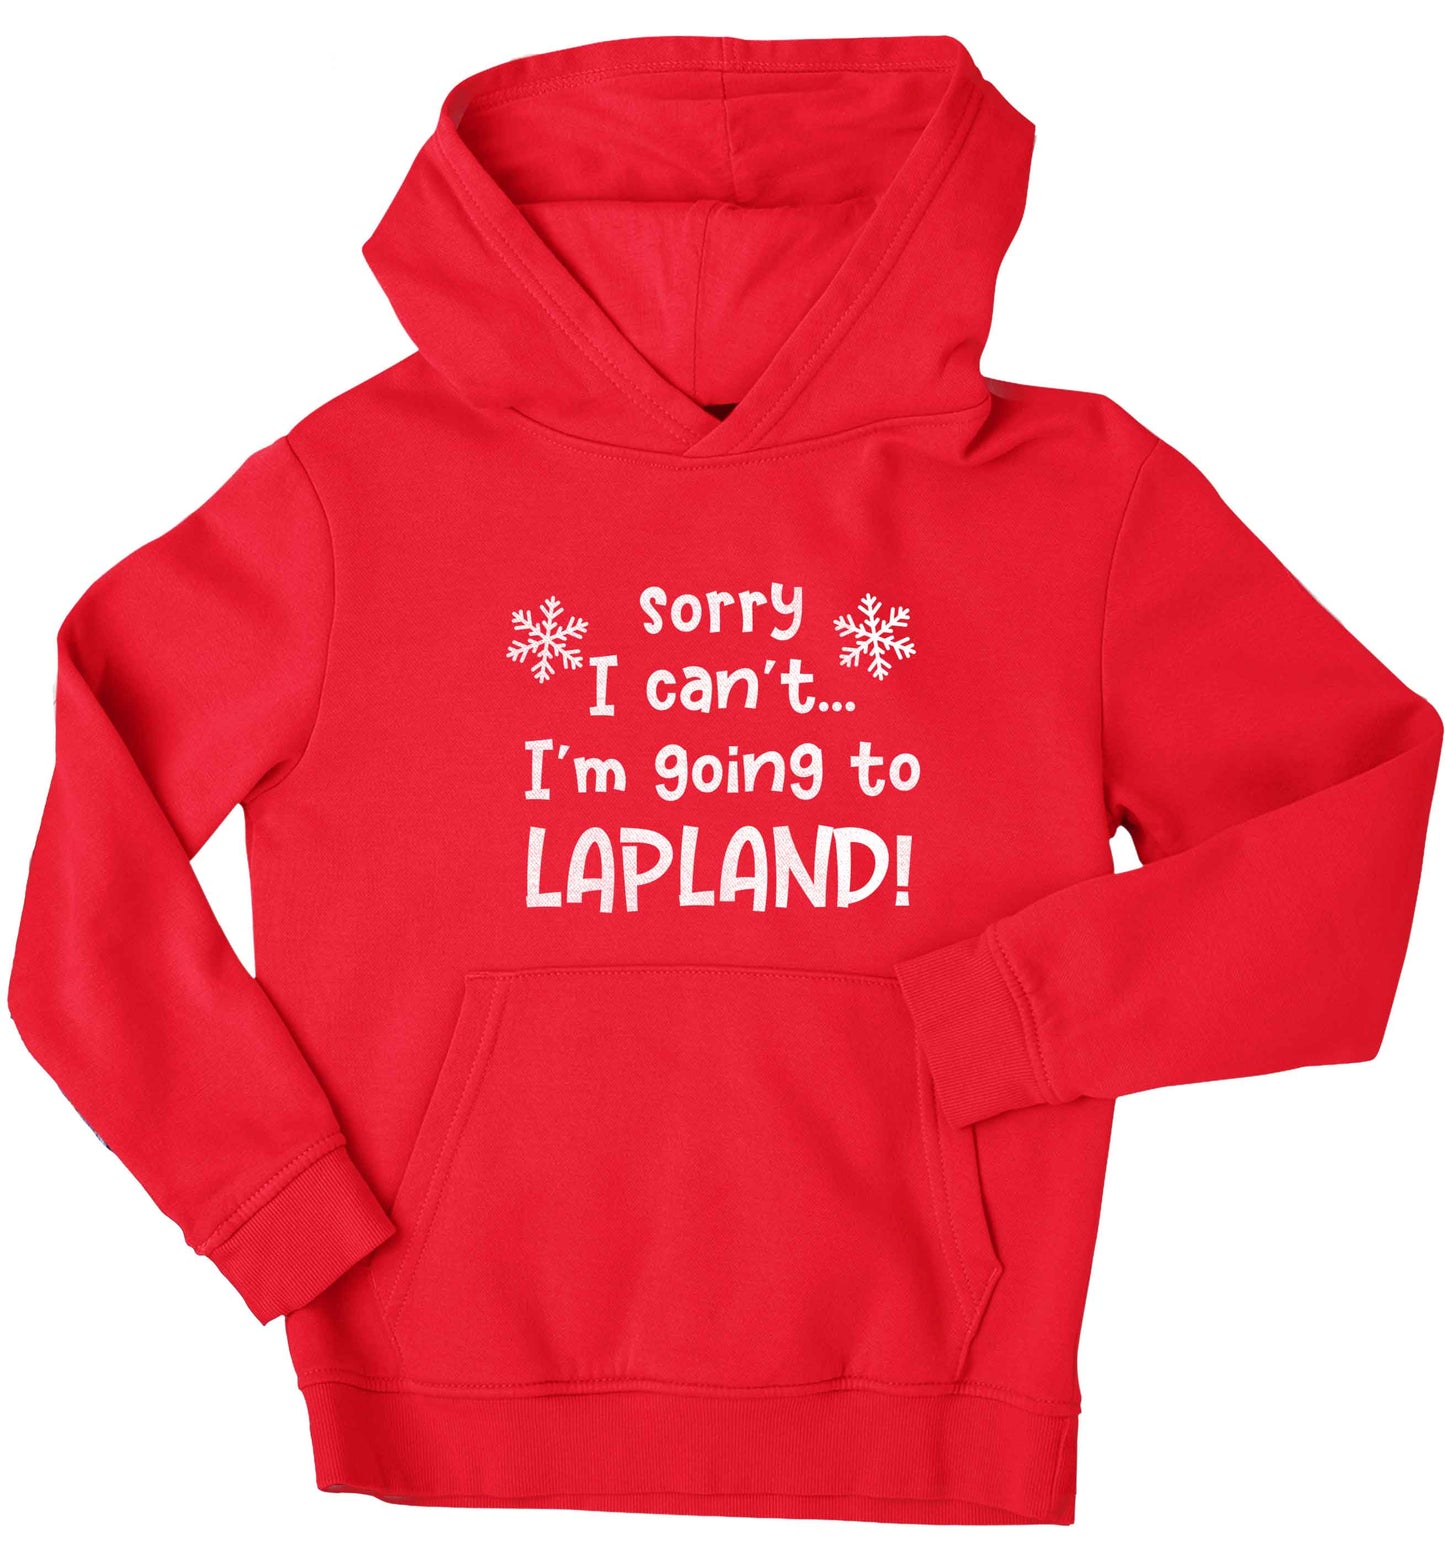 Sorry I can't I'm going to Lapland children's red hoodie 12-13 Years